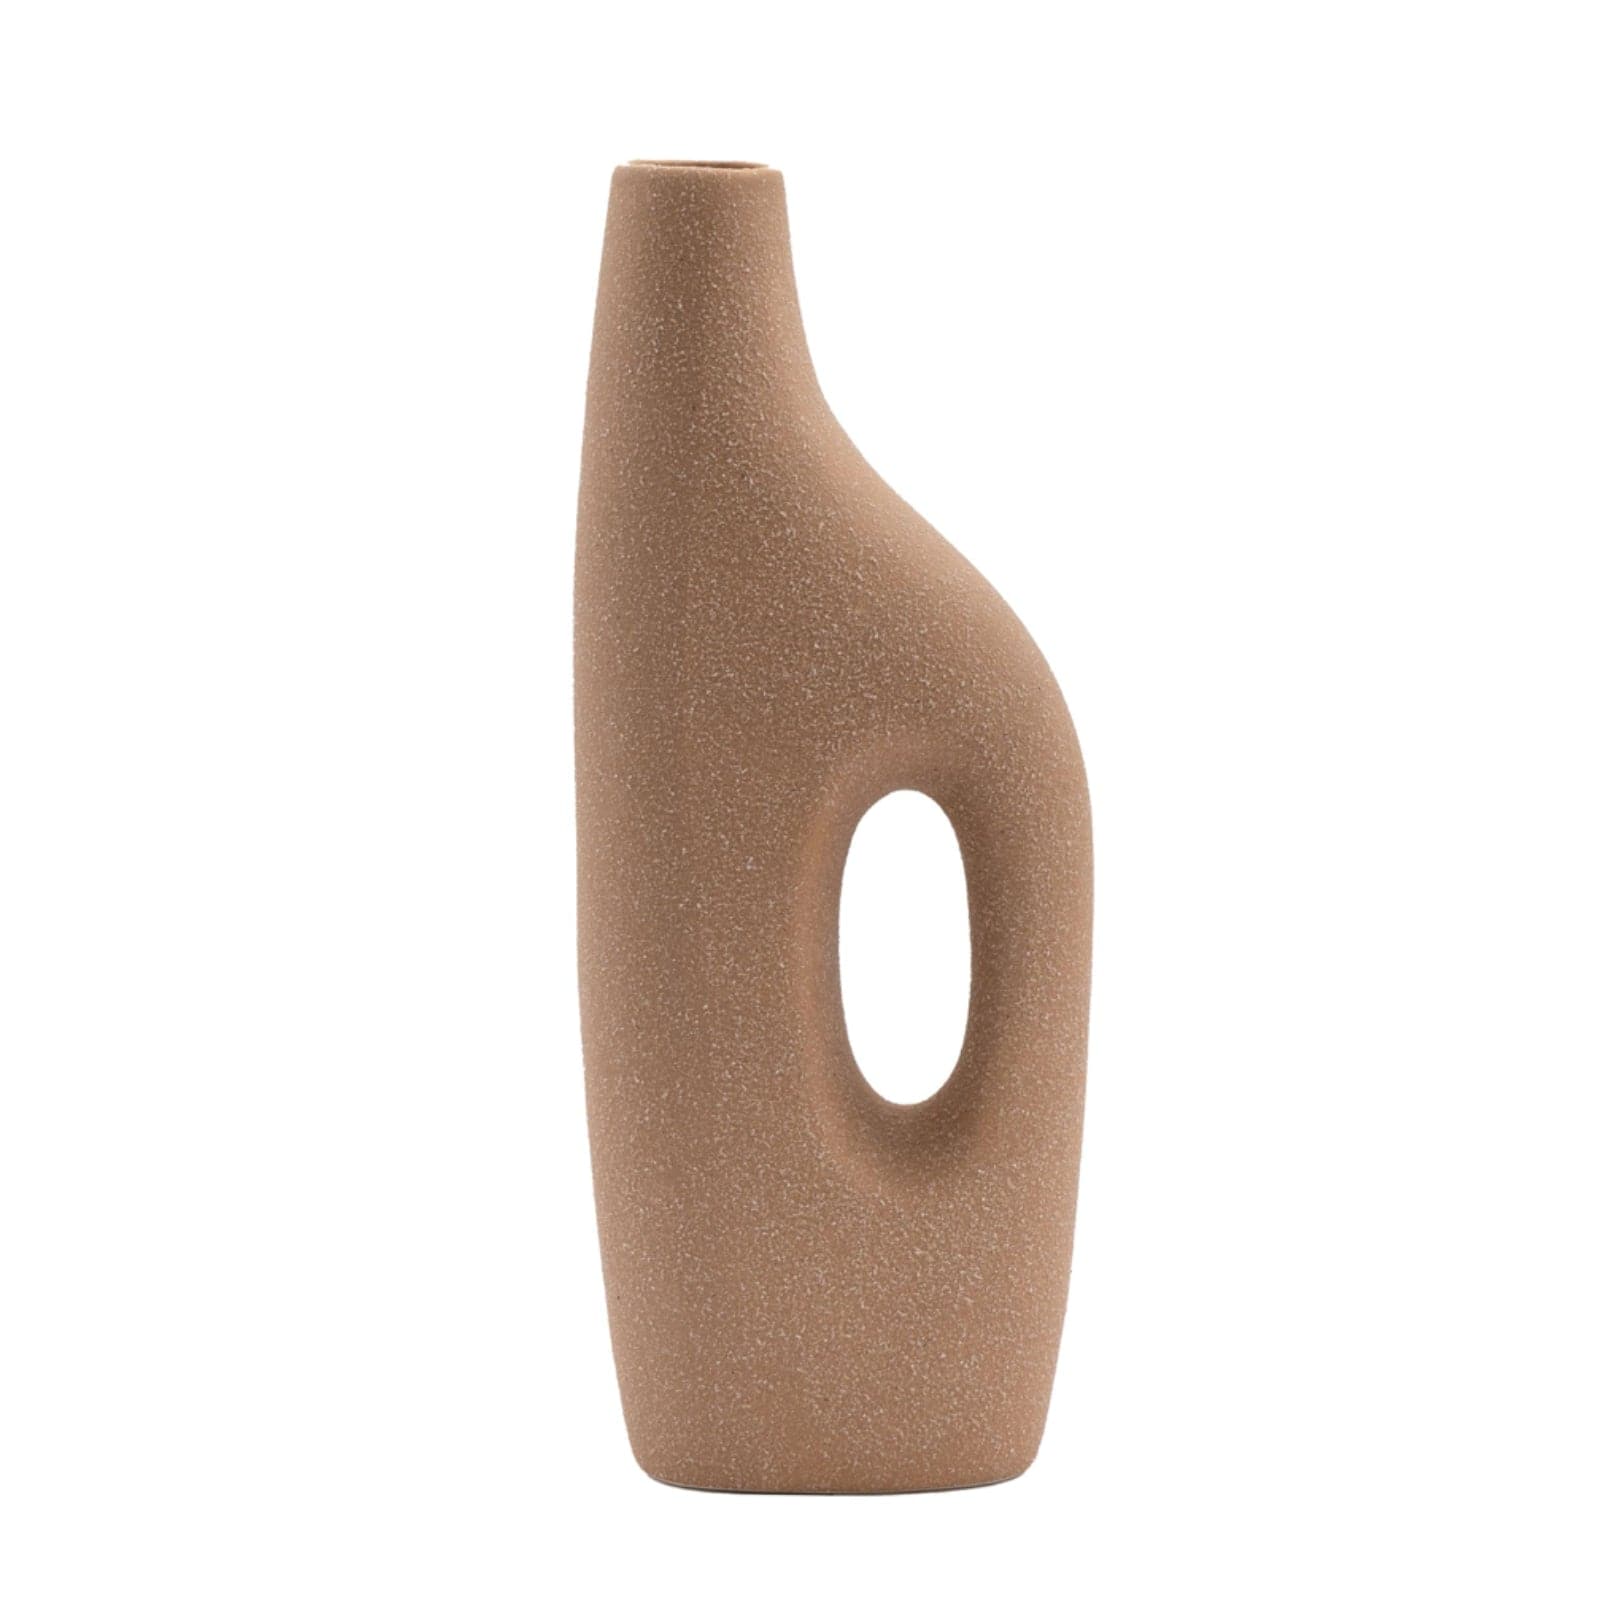 Textured Soft Shaped Vase - The Farthing